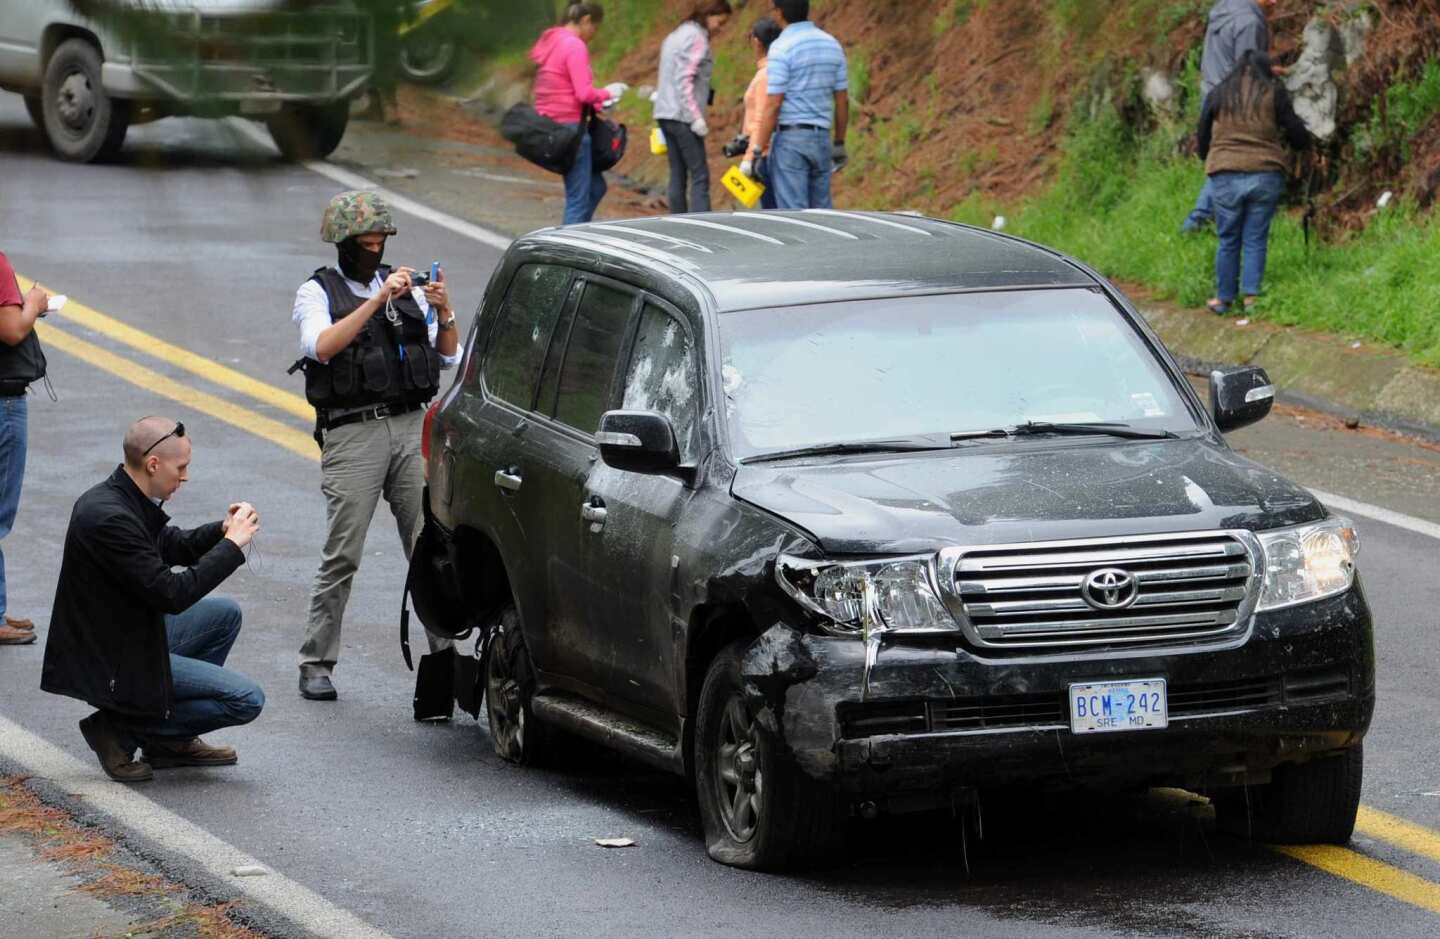 Forensic investigators take photos of a U.S. diplomatic vehicle on which federal police opened fire Friday south of Mexico City. The shooting left two embassy staffers wounded.